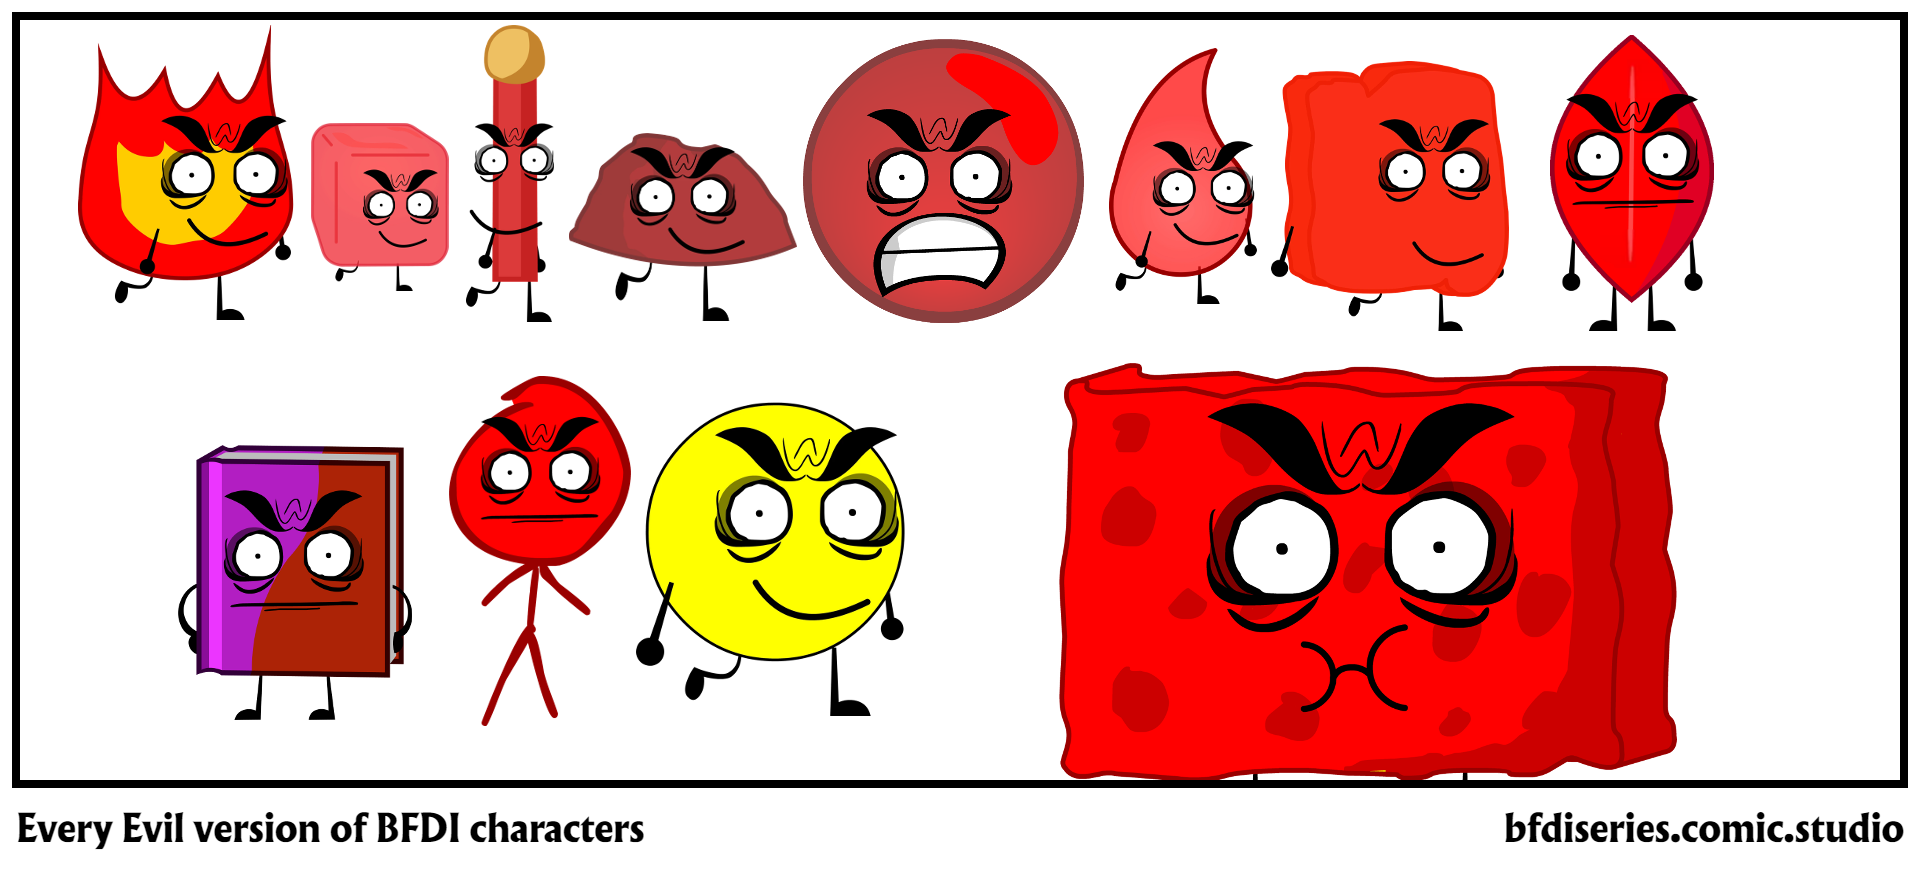 Every Evil version of BFDI characters